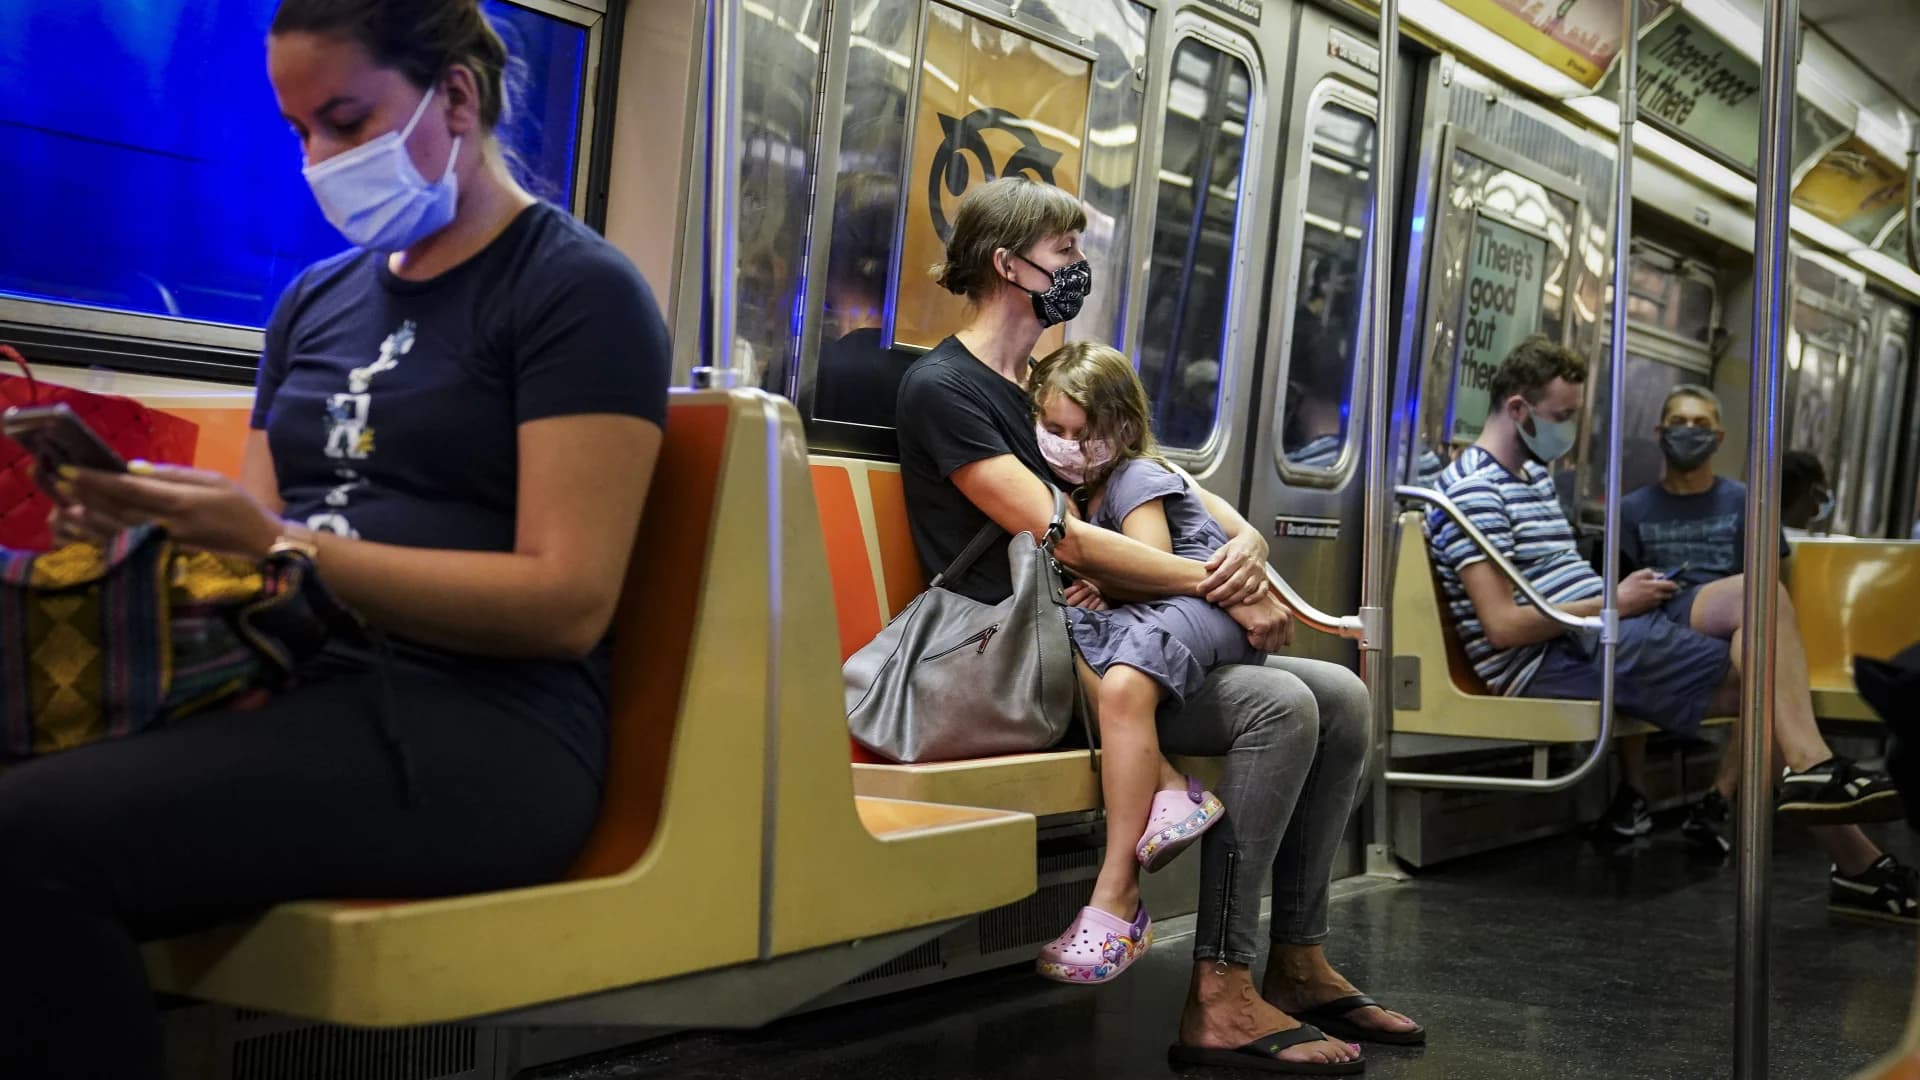 8 tips to reduce your risk of getting sick while using public transit